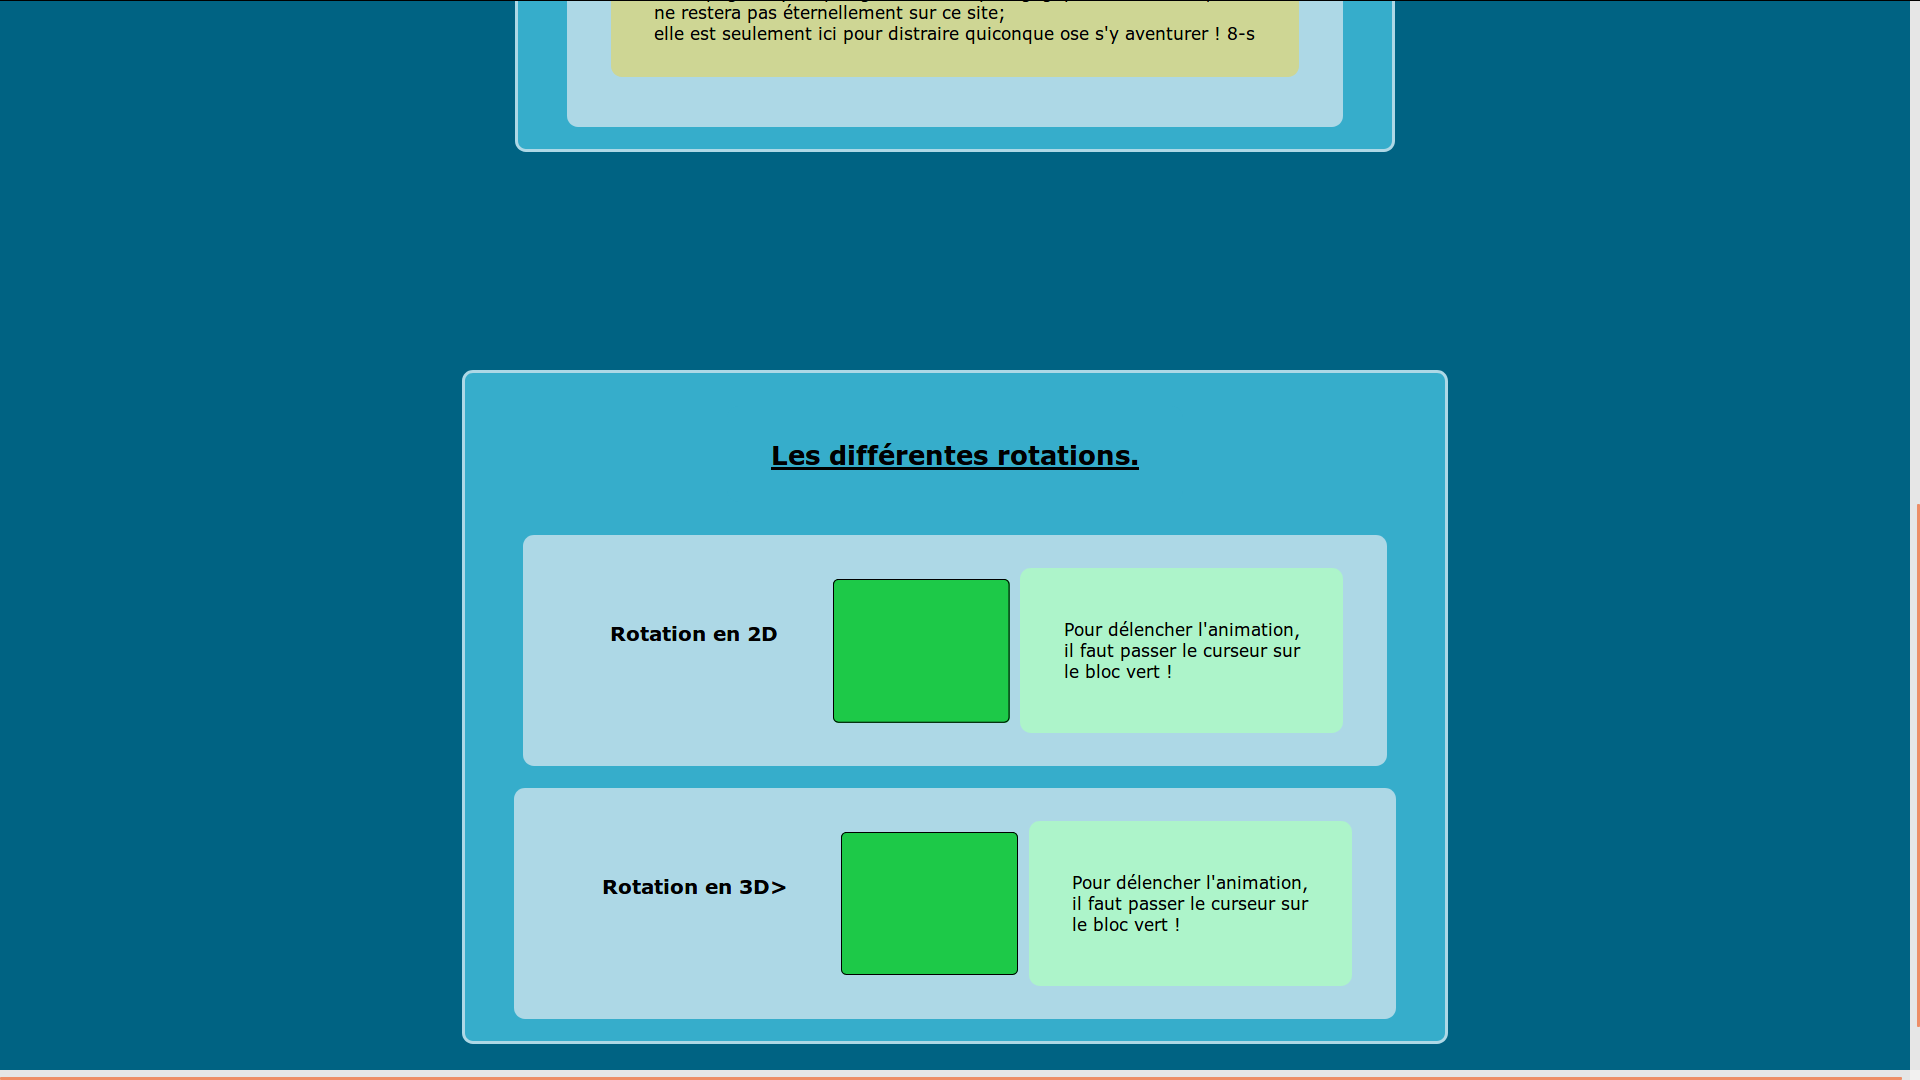 Nom : rotations_image.png
Affichages : 116
Taille : 42,0 Ko